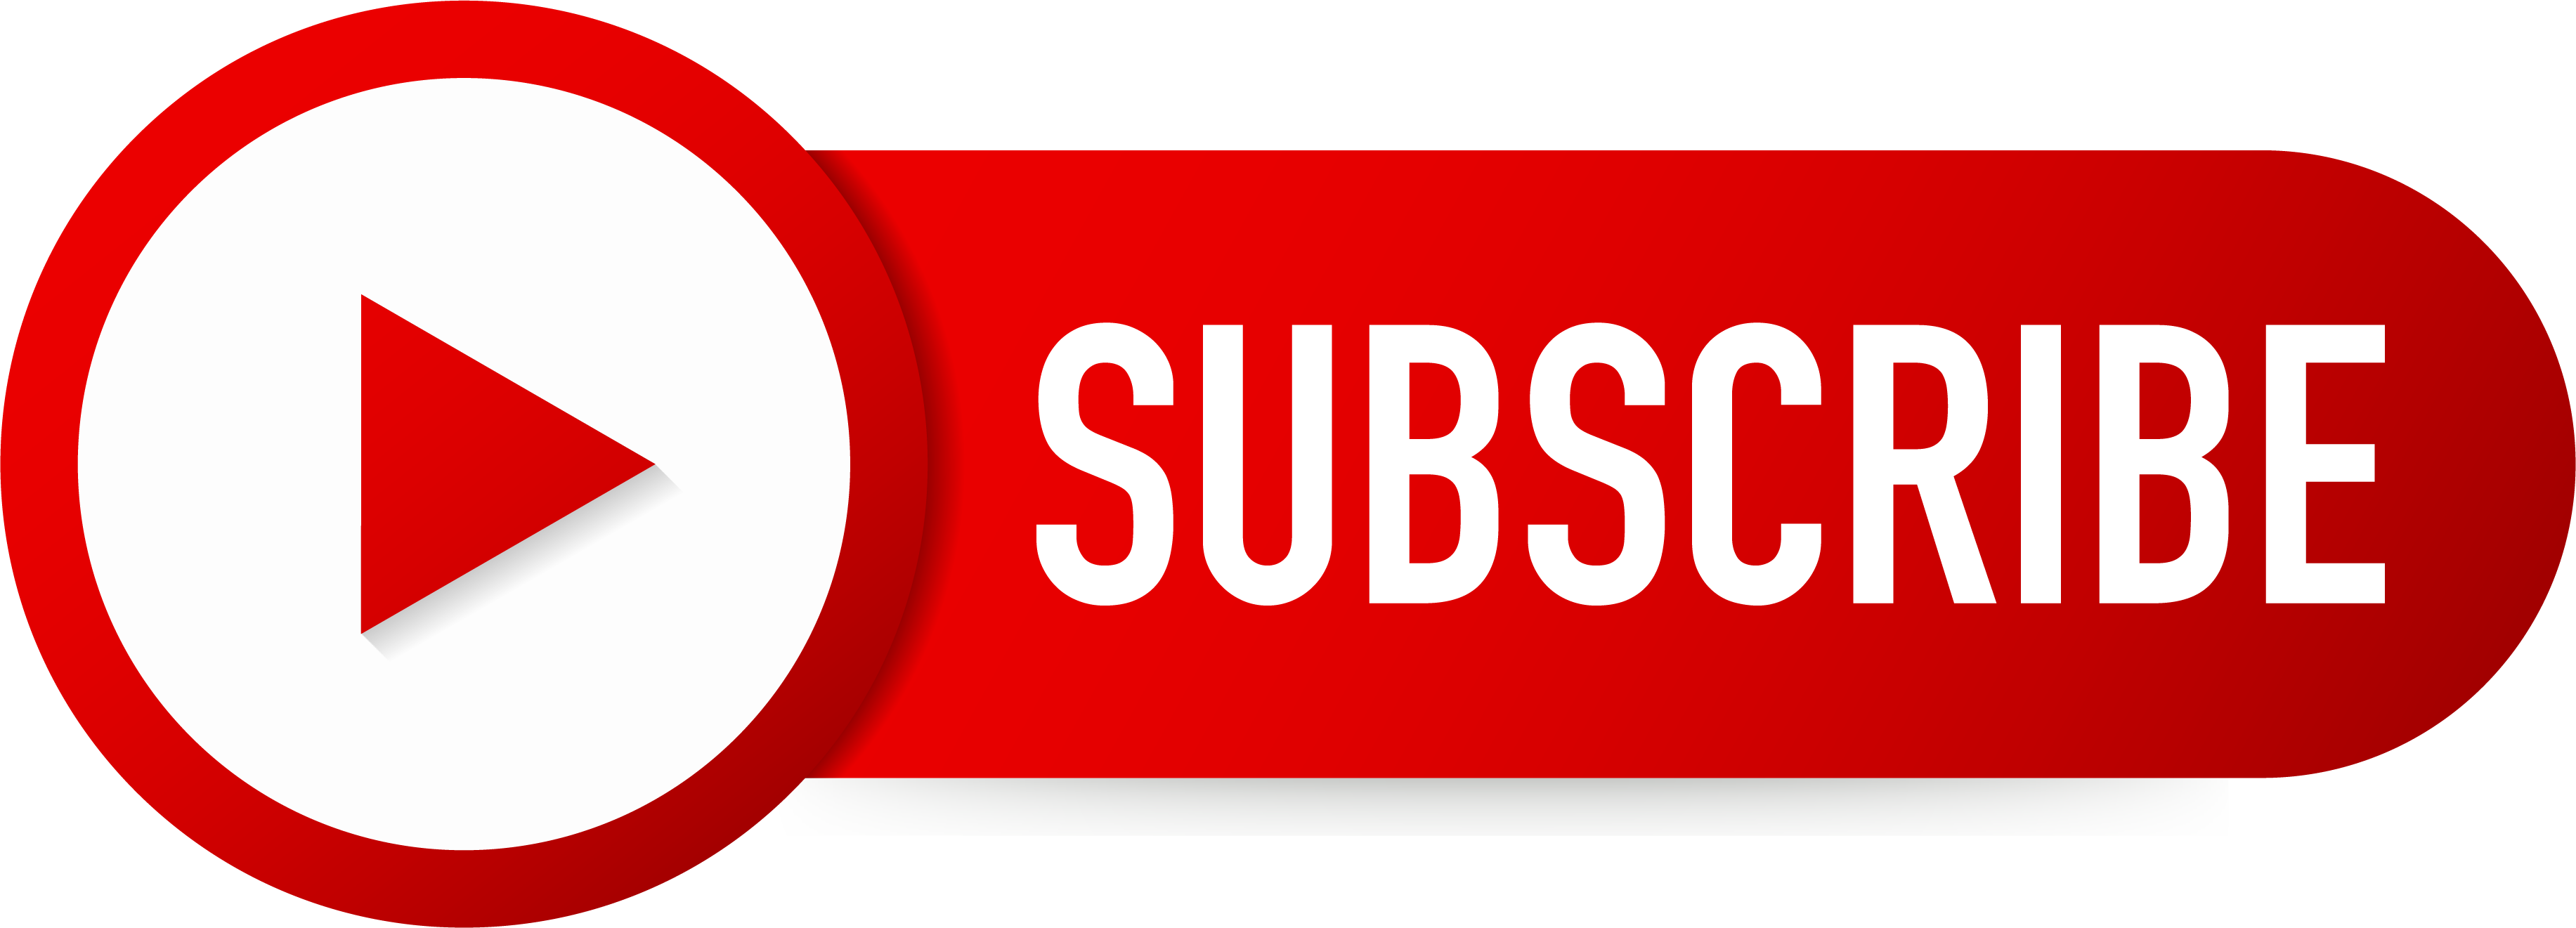 Subscribe Button Png Transparent Image Download Size 3666x1321px